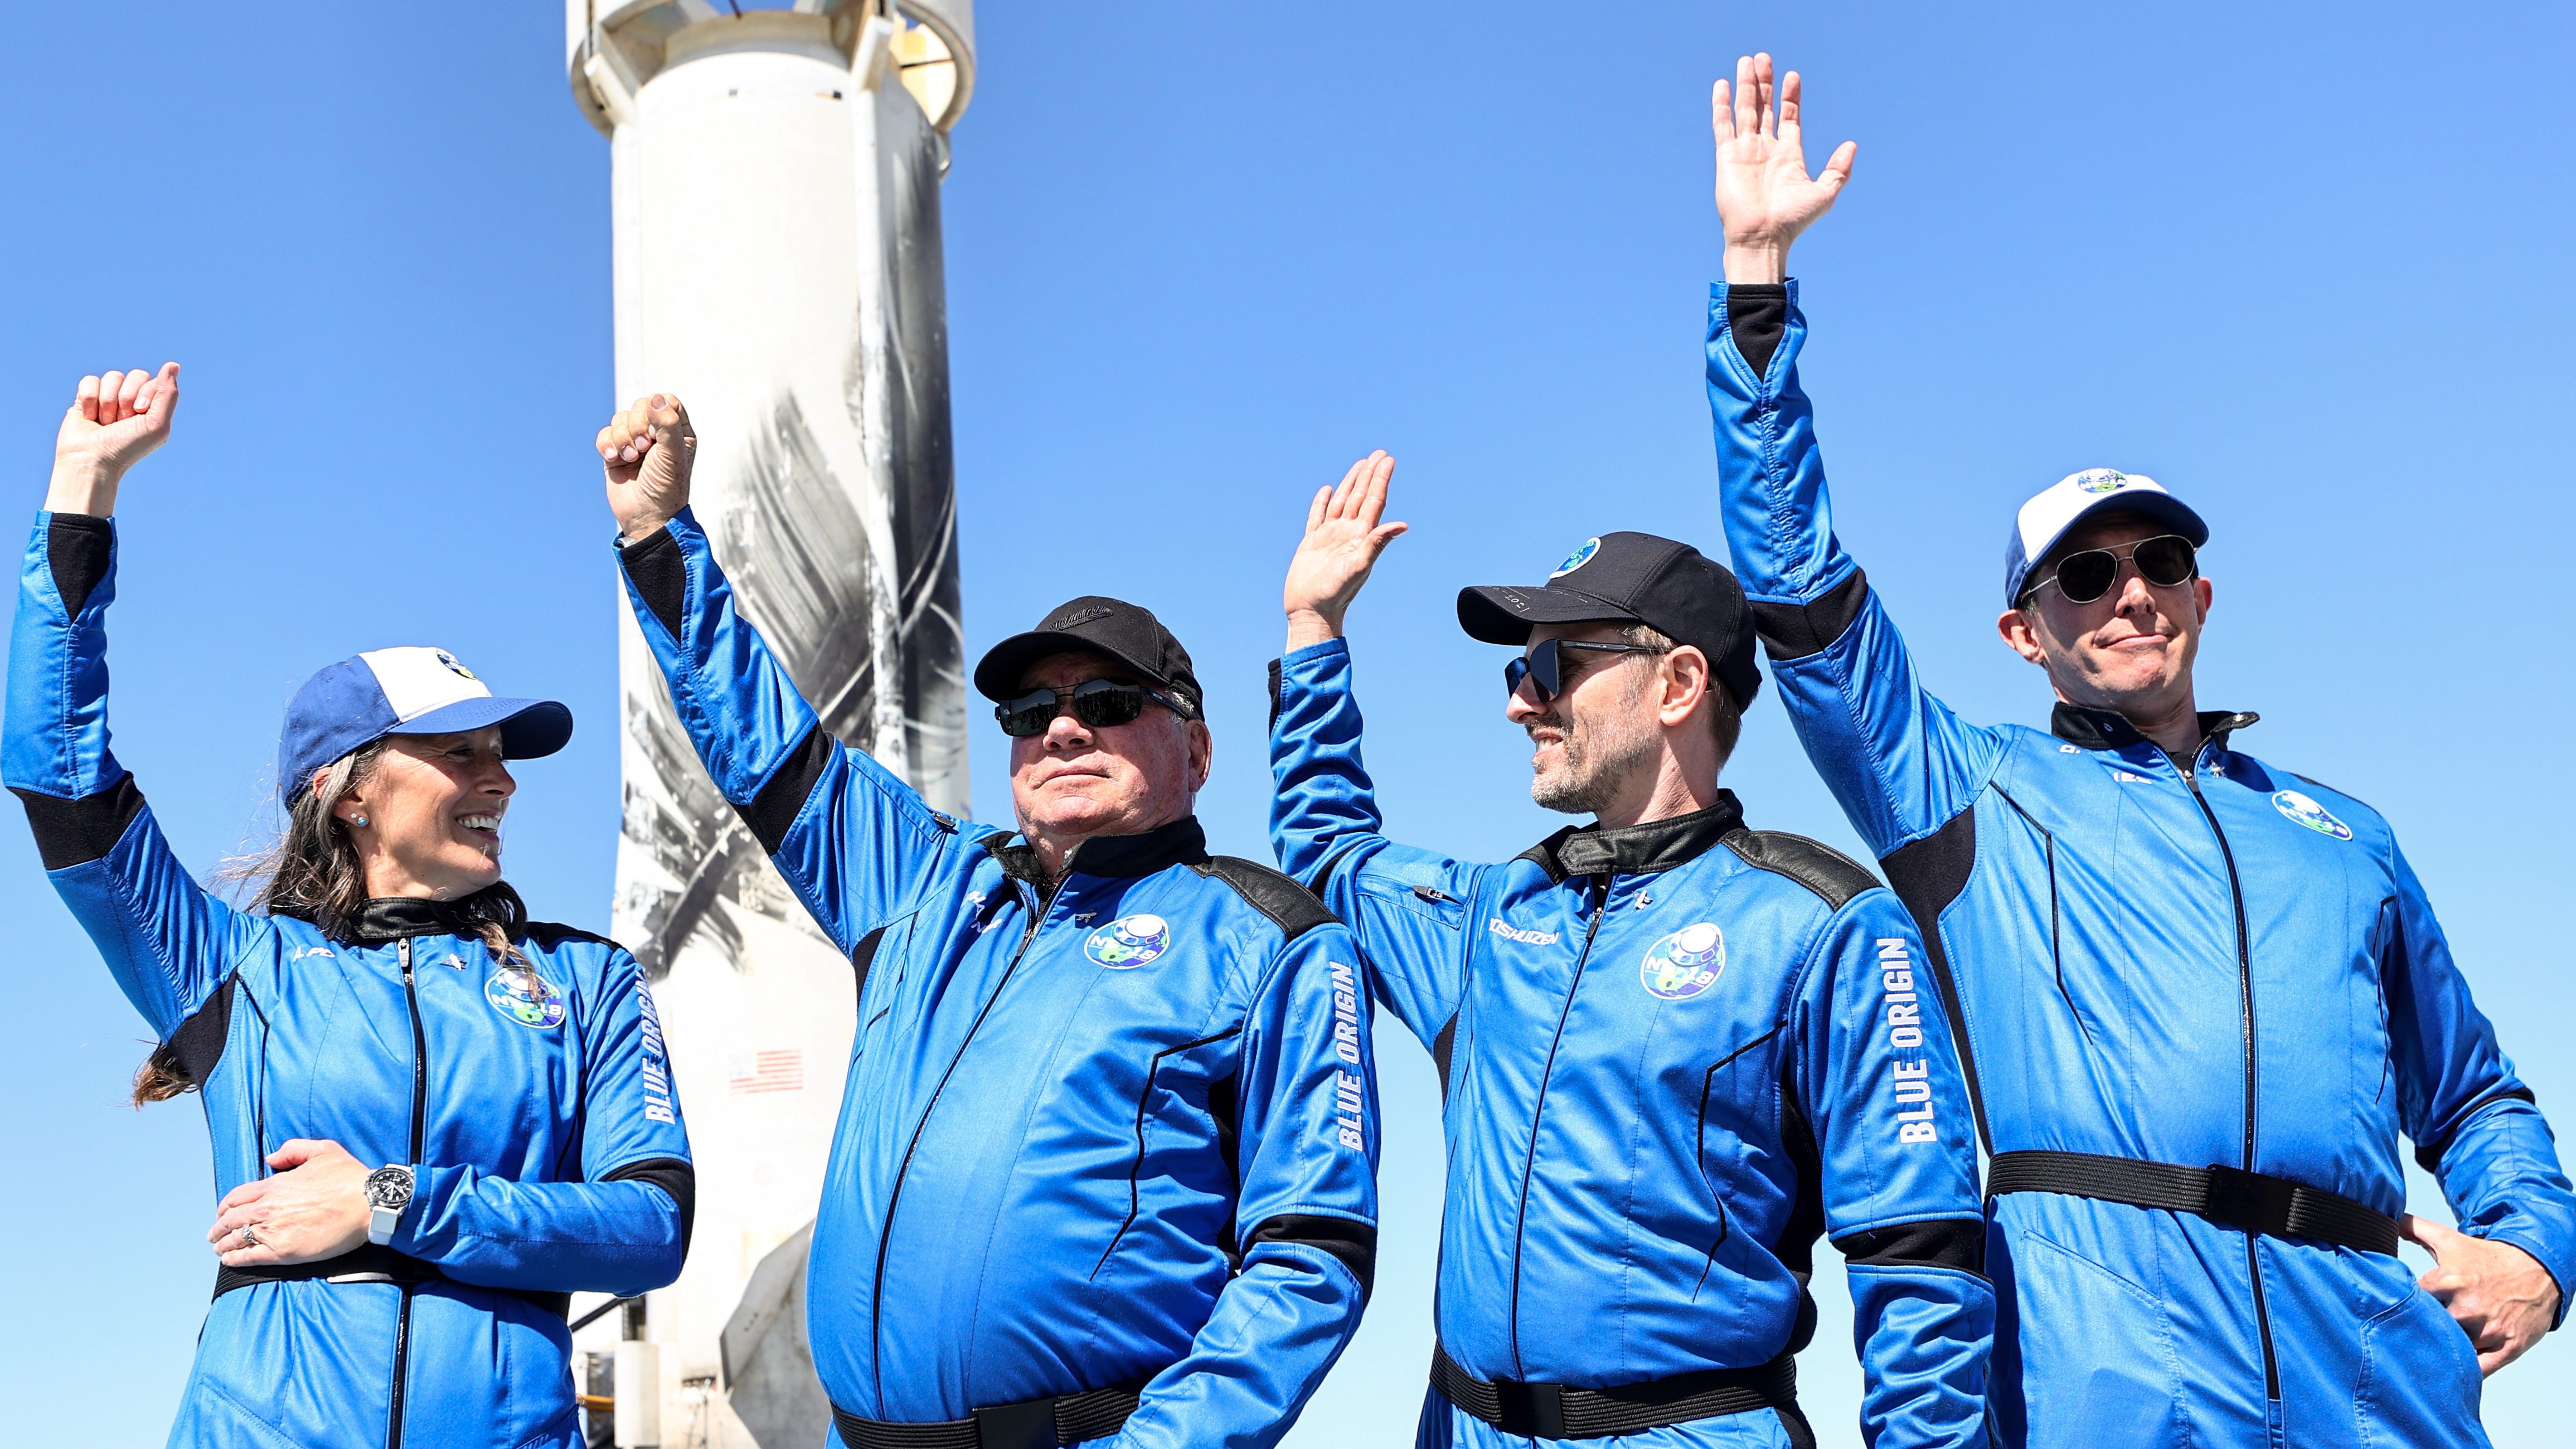 Blue Origin vice president of mission and flight operations Audrey Powers, Star Trek actor William Shatner, Planet Labs co-founder Chris Boshuizen and Medidata Solutions co-founder Glen de Vries wave during a media availability on the landing pad of Blue Origin’s New Shepard after they flew into space on Oct. 13, 2021 near Van Horn, Texas. Shatner became the oldest person to fly into space on the ten minute flight.